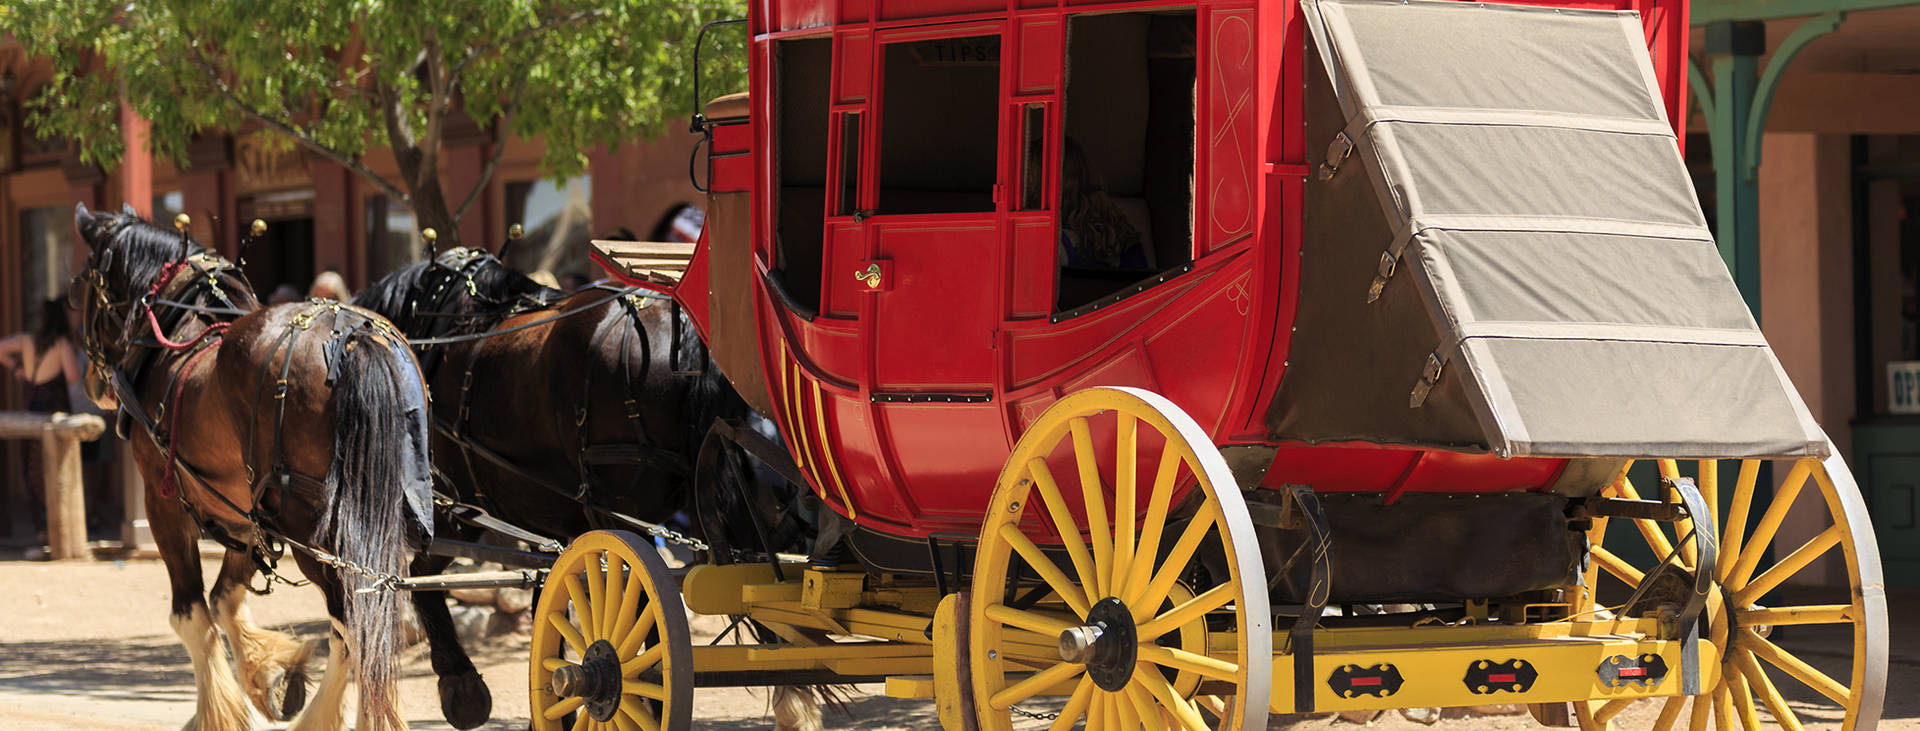 Wells Fargo Carriage With Horses Wallpaper